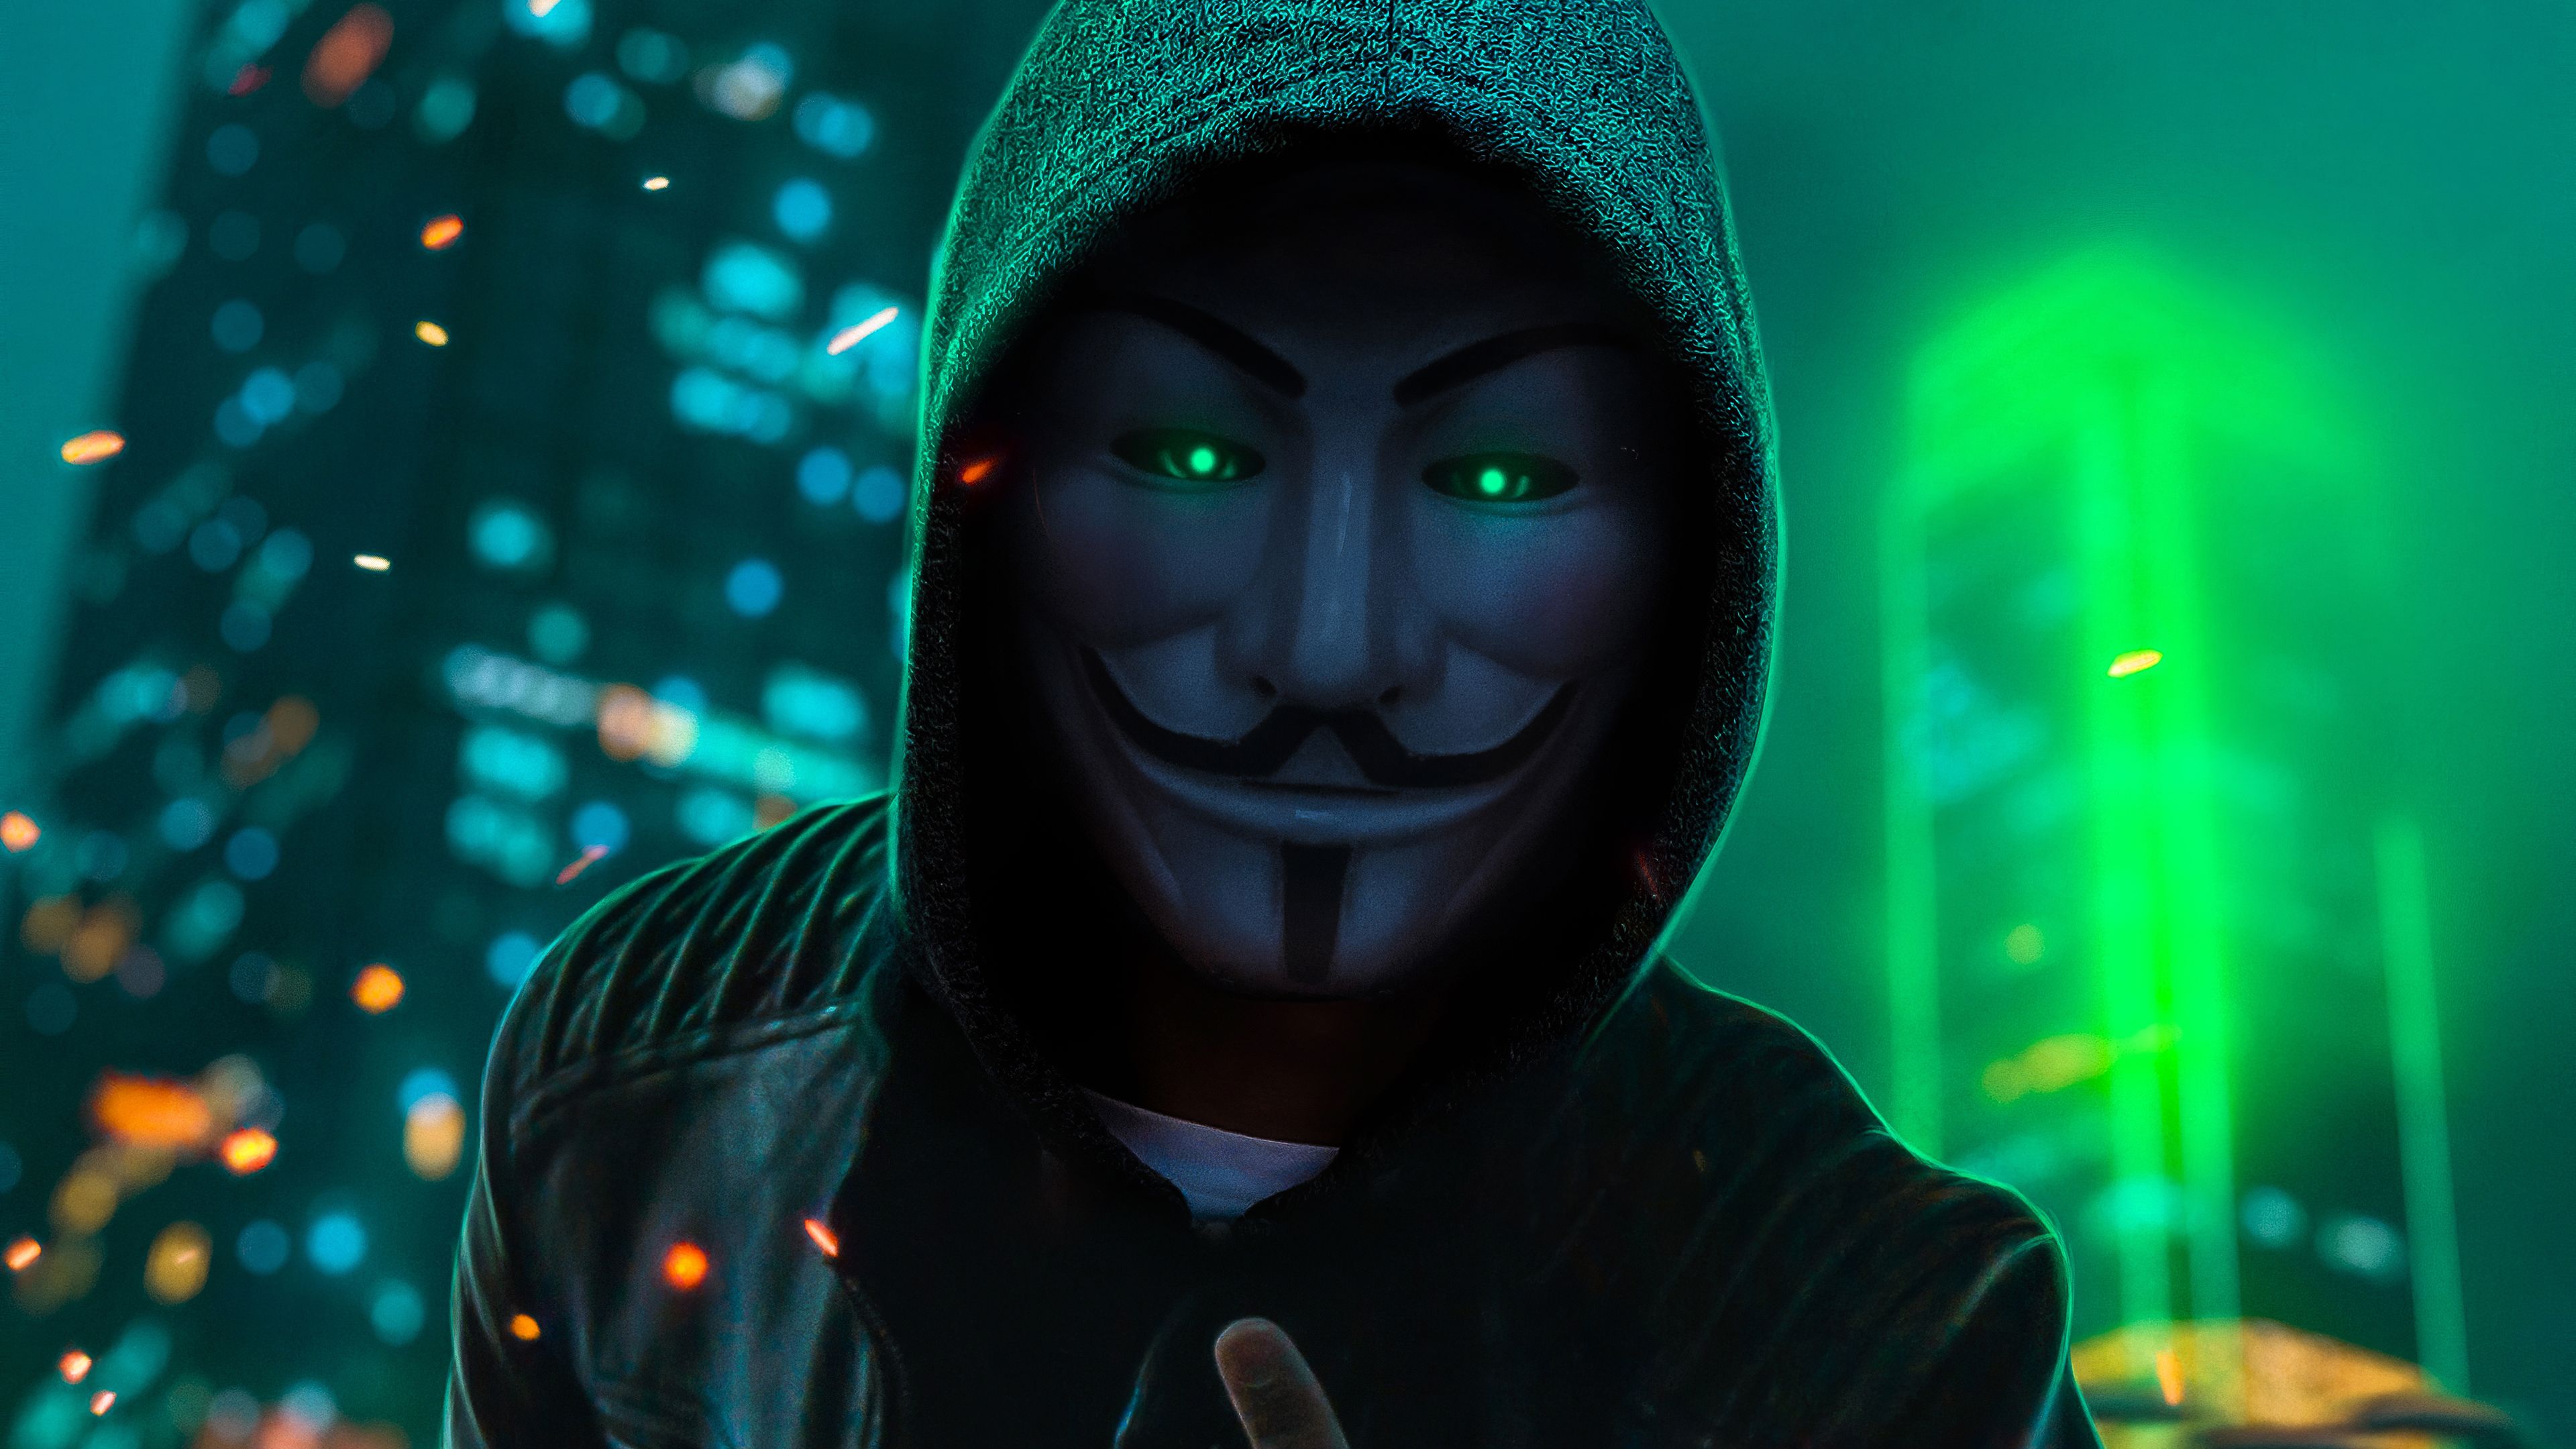 Anonymus mask with green neon colors Wallpaper 4k Ultra HD